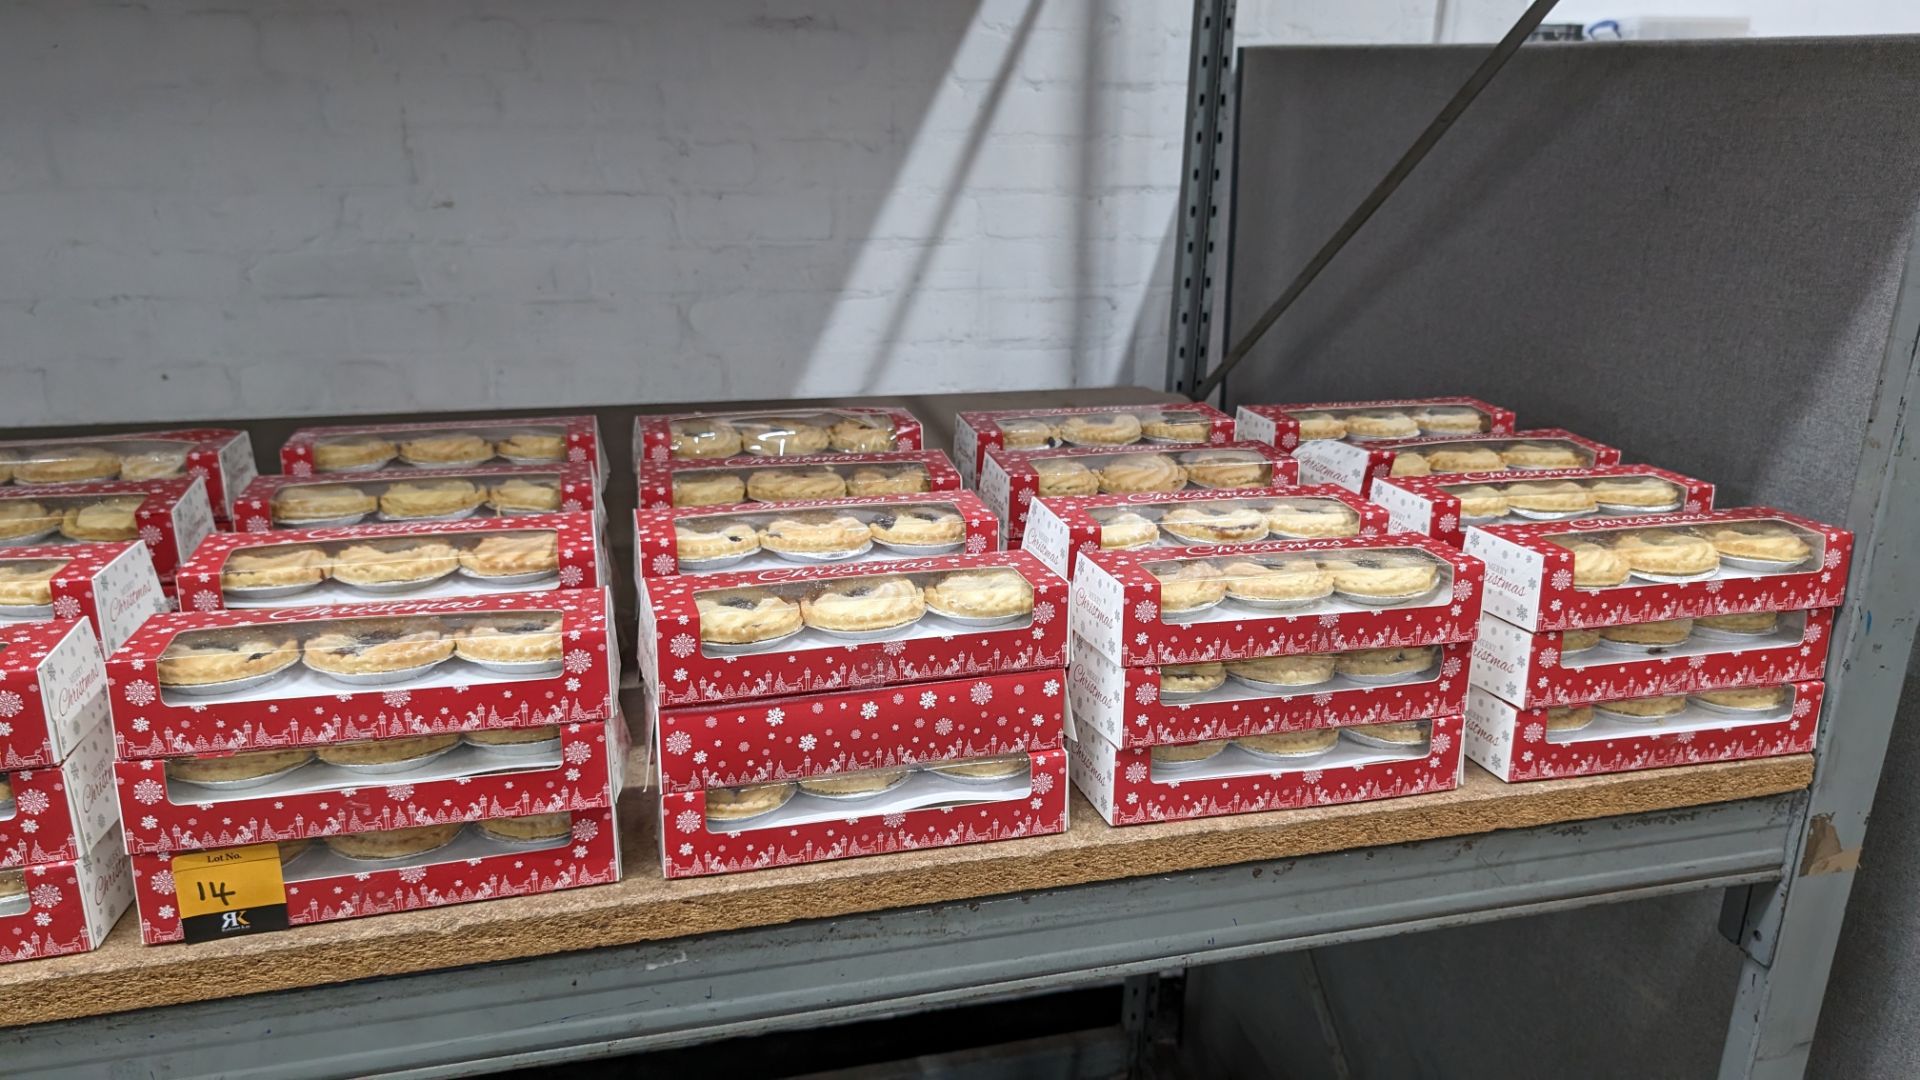 48 off 6 packs of Christmas mince pies. Each pack contains 6 pies on 2 layers & comes in Merry Chri